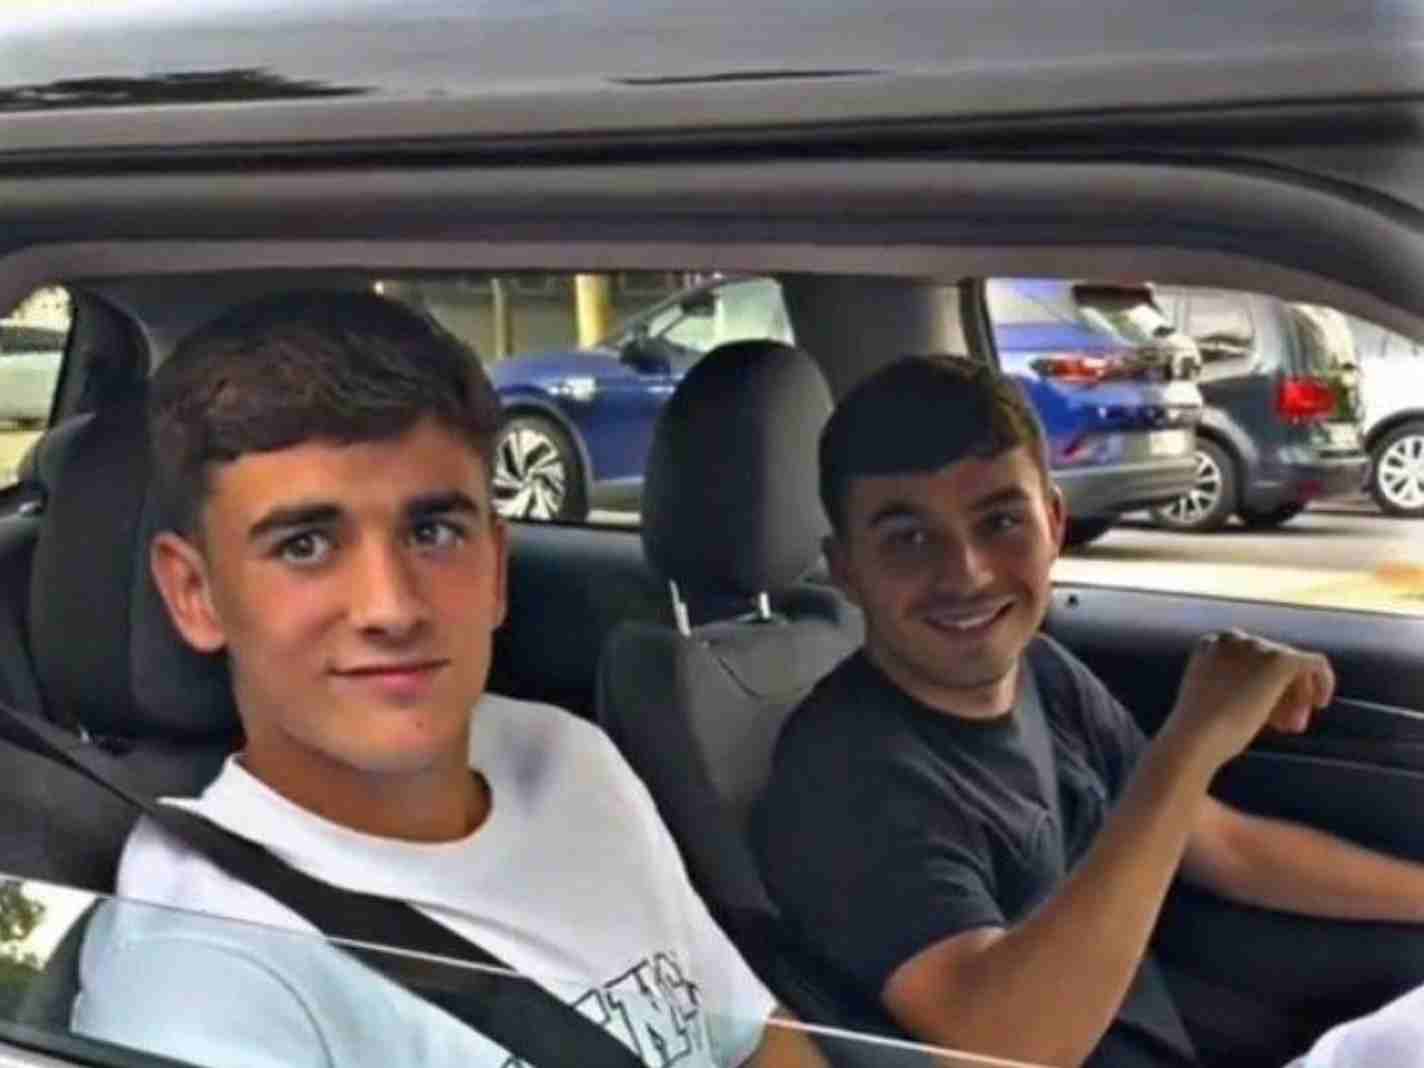 Pedri is Finally Free: Gavi Gets His License and No Longer Needs a Ride to Barcelona Training